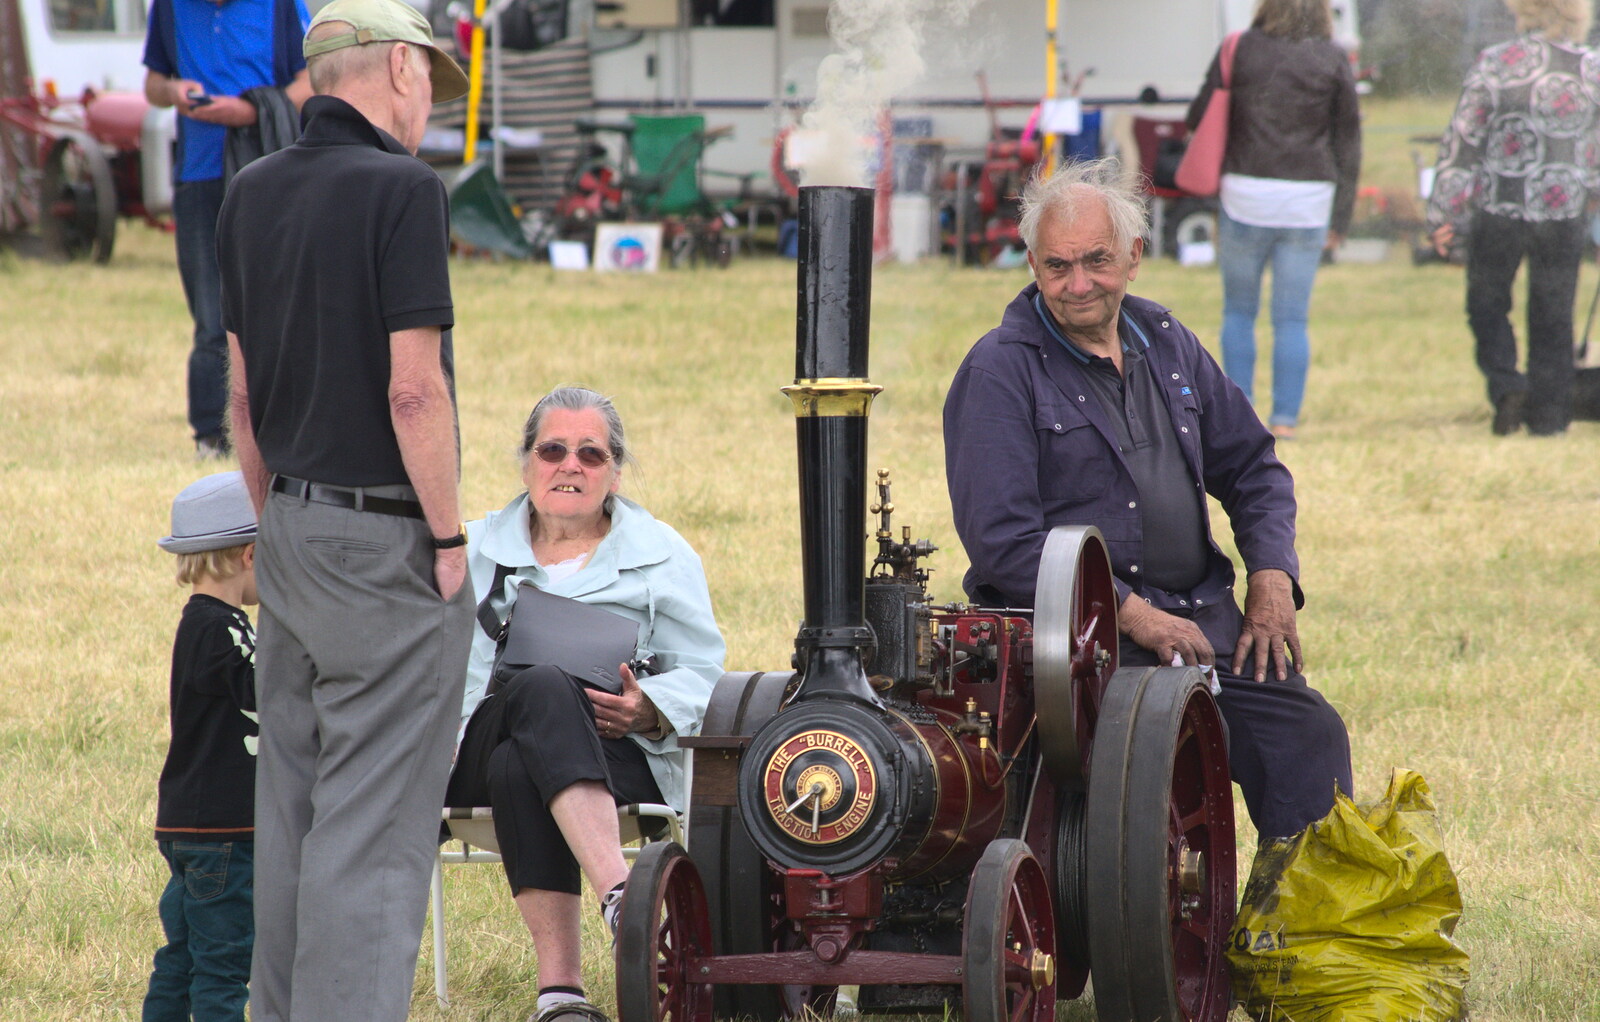 Grandad wanders over to look at a steam engine from A Vintage Tractorey Sort of Day, Palgrave, Suffolk - 21st June 2015